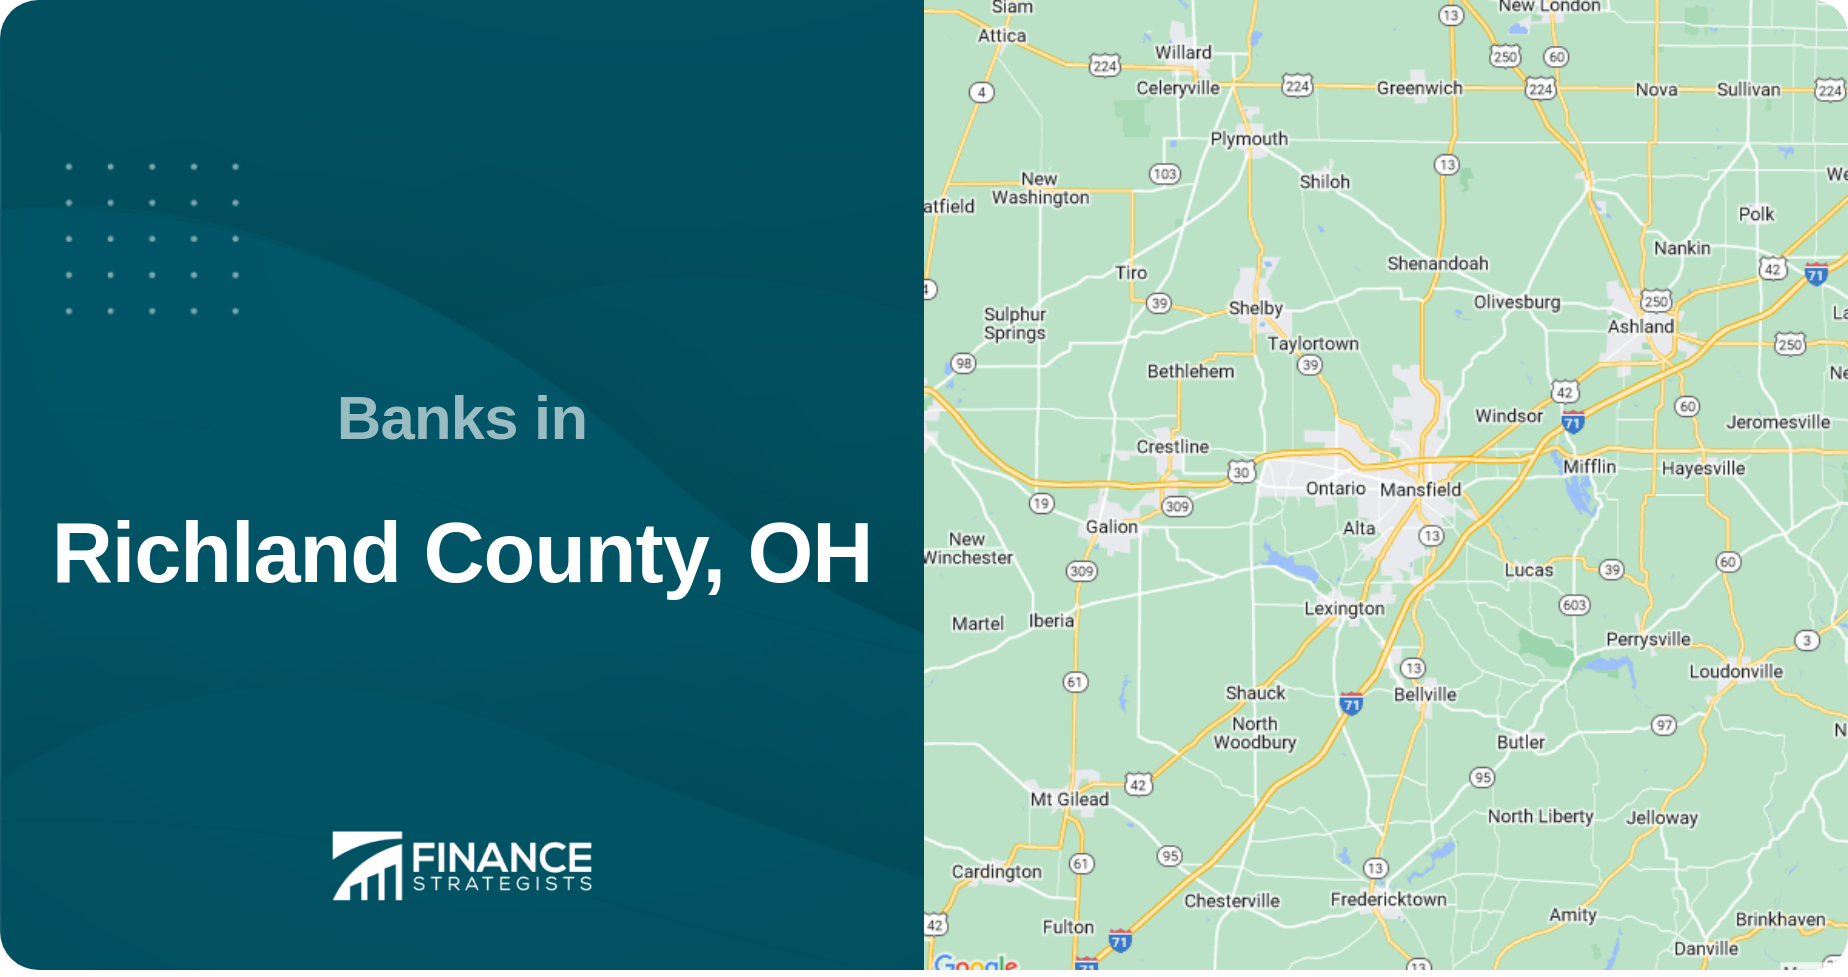 Banks in Richland County, OH